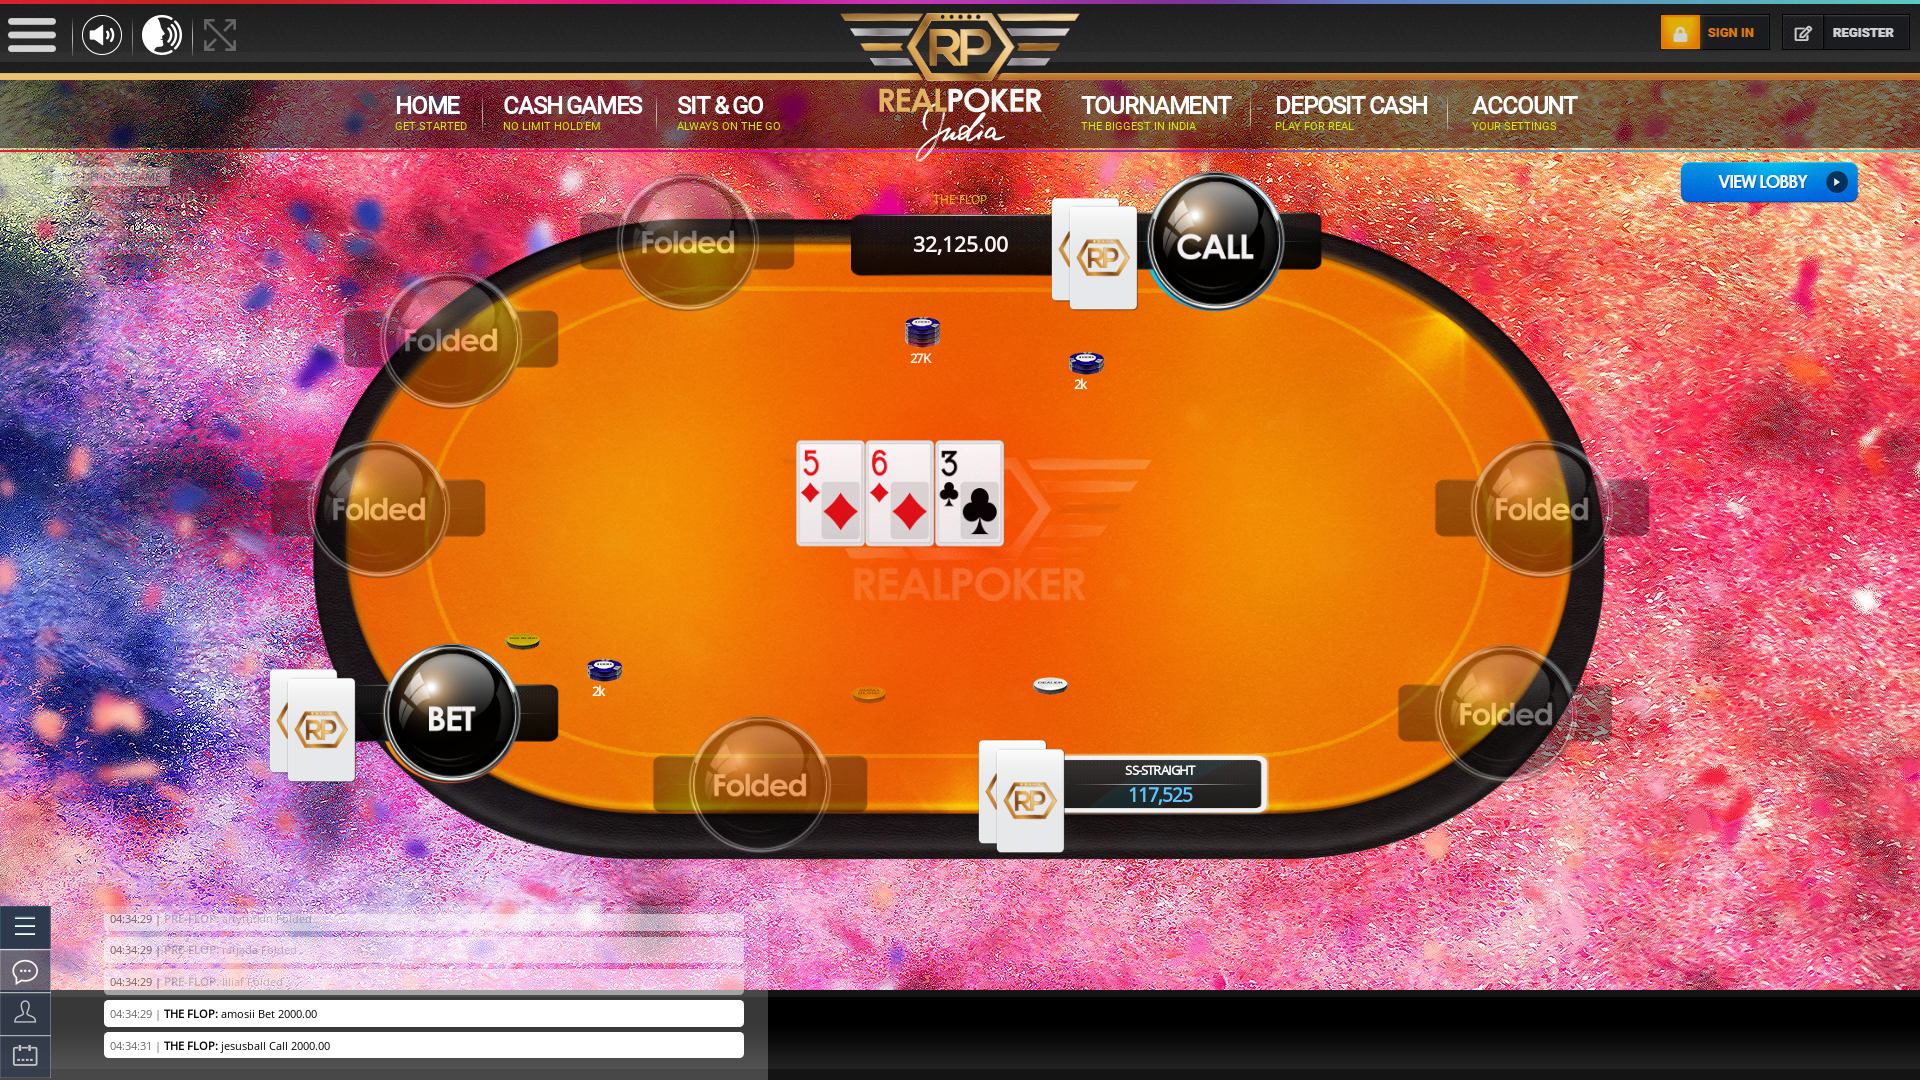 Indian online poker on a 10 player table in the 54th minute match up